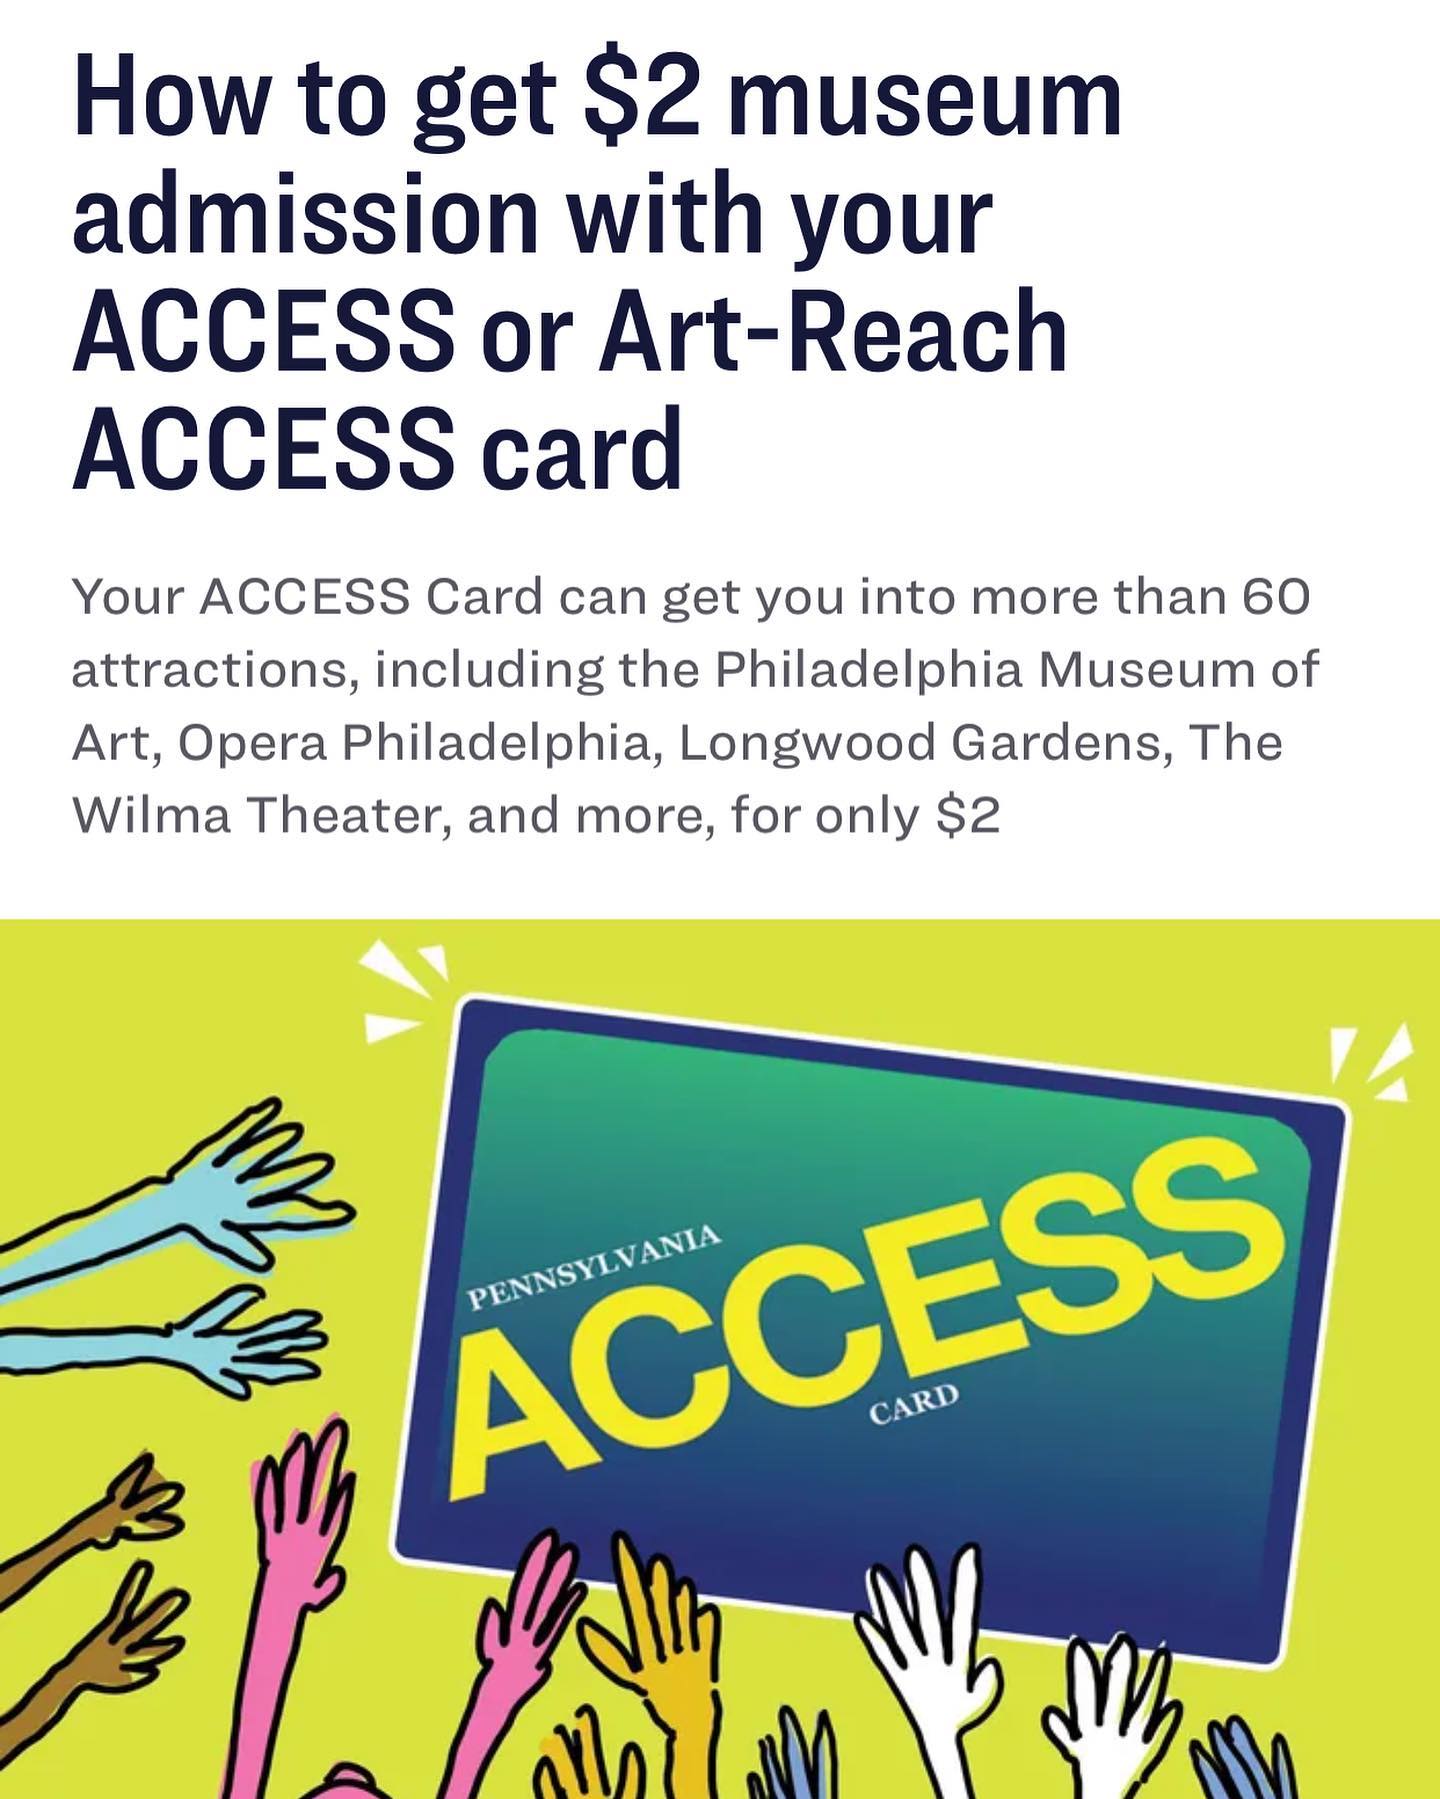 Image description: News story headline reading “how to get $2 museum admission with your ACCESS or Art-Reach ACCESS Card”. Underneath the headline is an illustration of different colored hands reaching for a green-blue ACCESS Card. See less